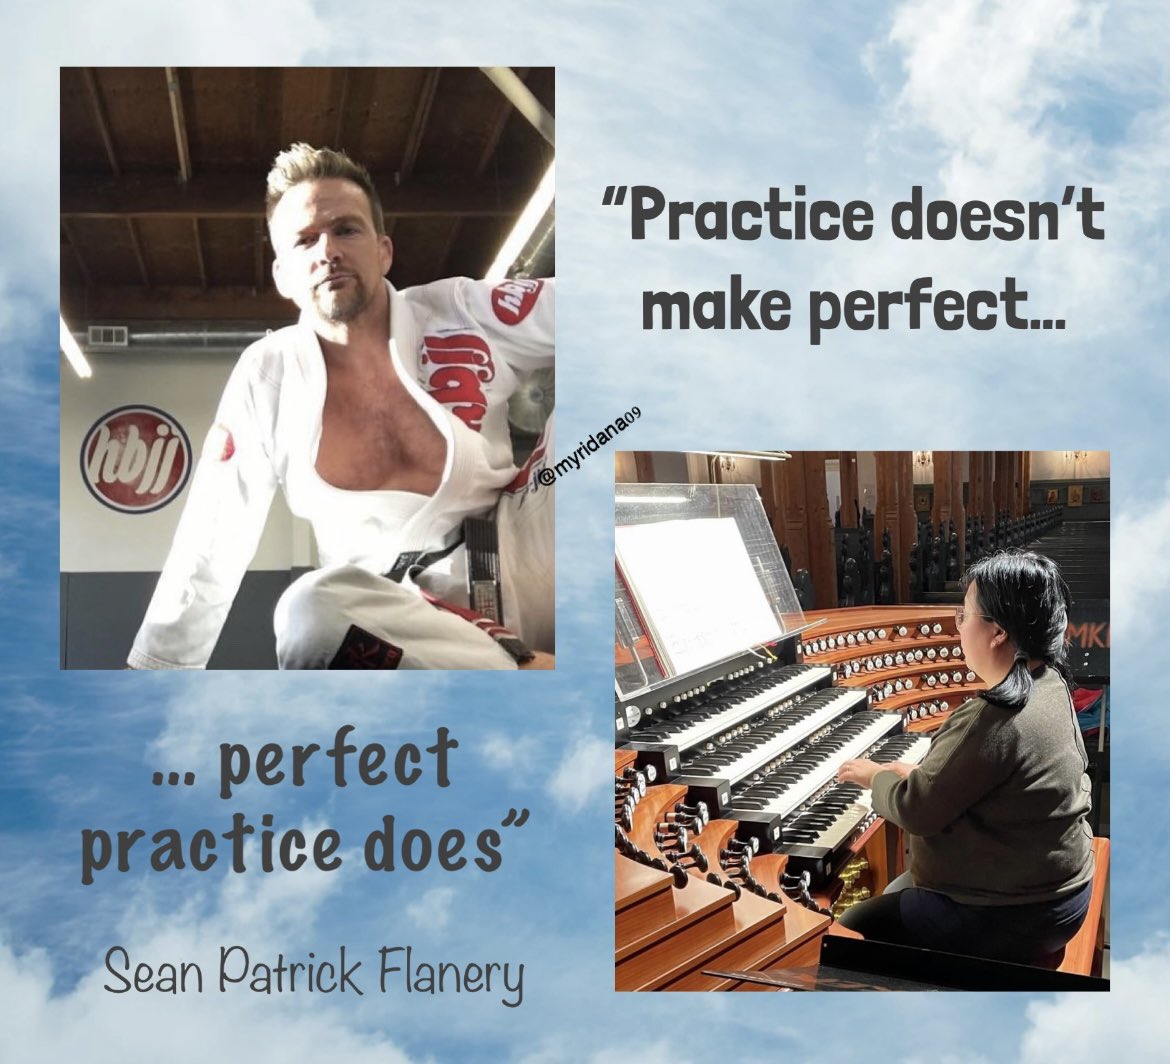 This. Life philosophy to live by #seanpatrickflanery #actor #author #producer #director #bjj #martialarts #motivation #life #music #practice #wisdombyflanery #inspiration @seanflanery